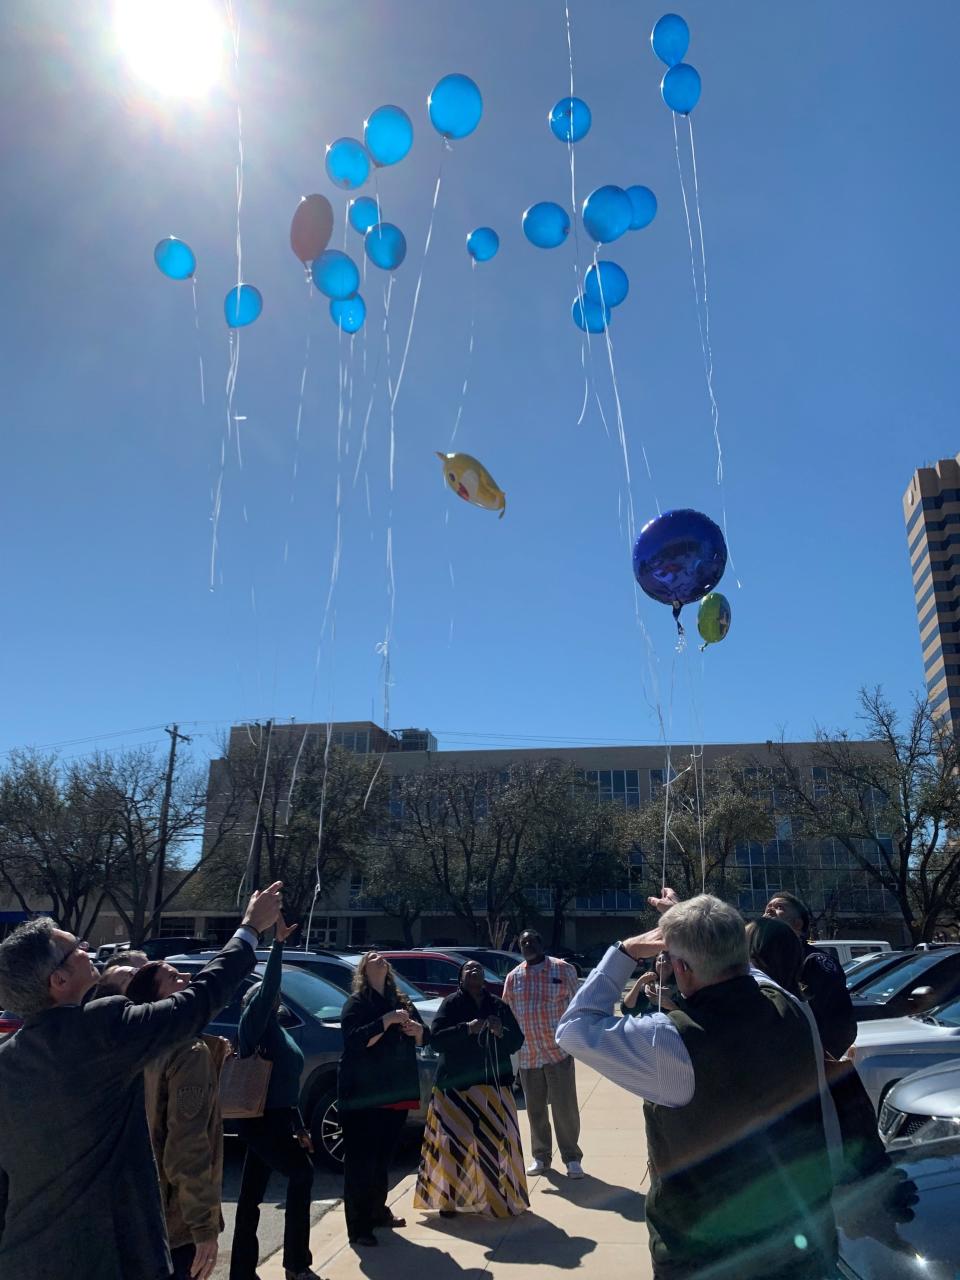 Family, investigators, attorneys and detectives stand outside the Taylor County Courthouse on Friday, March 1, for a balloon release in honor of Dairess Fuller, Jr. who died at the age of 22 months after his mother withheld nutrition and medical attention.